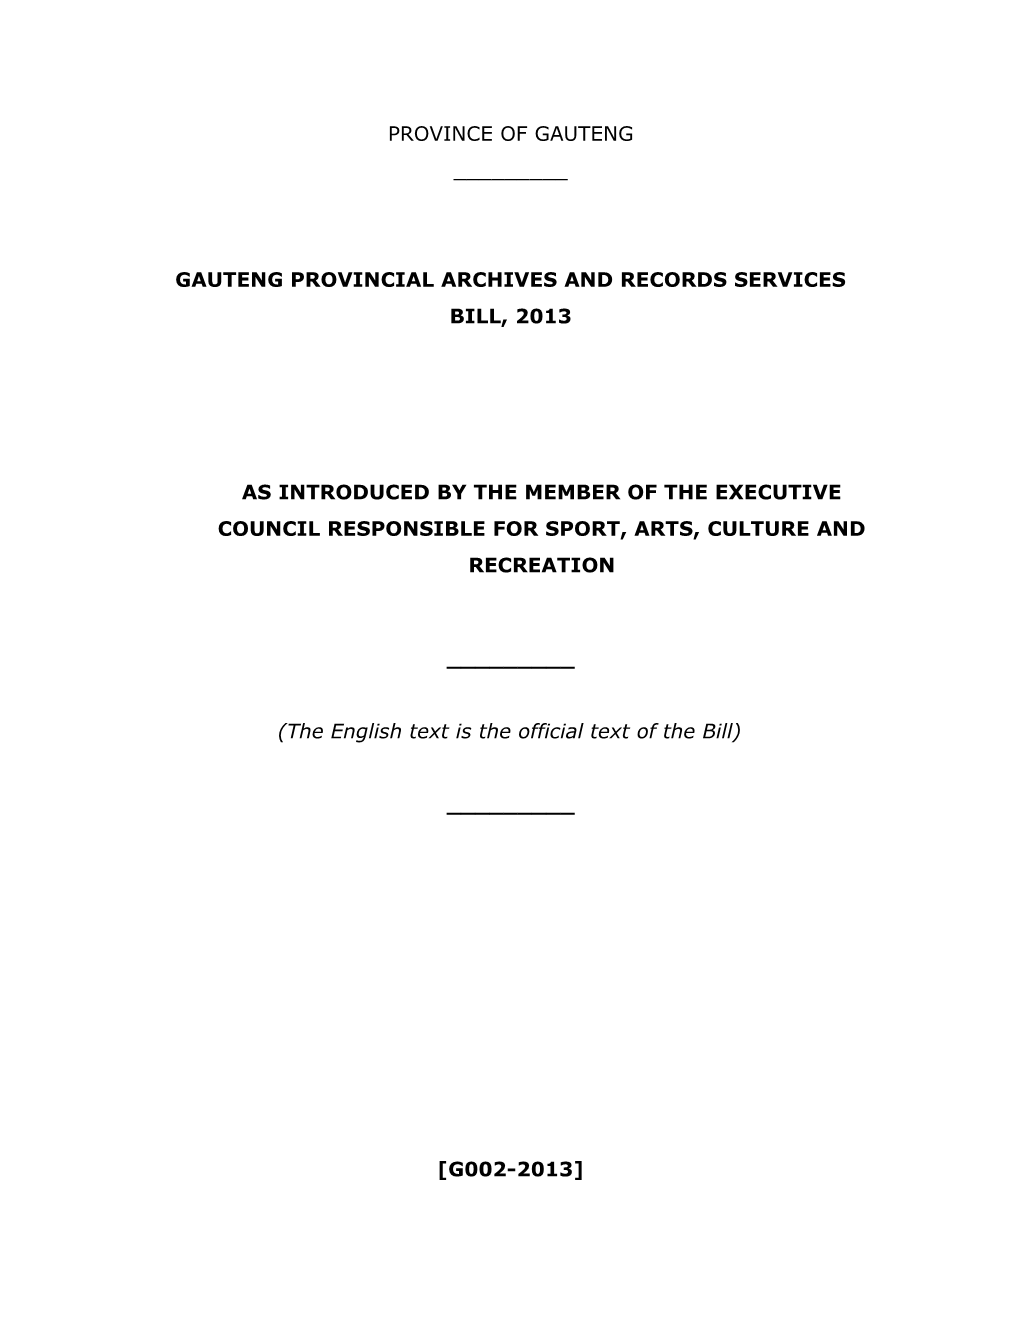 Gauteng Provincial Archives and Records Services Bill, 2013